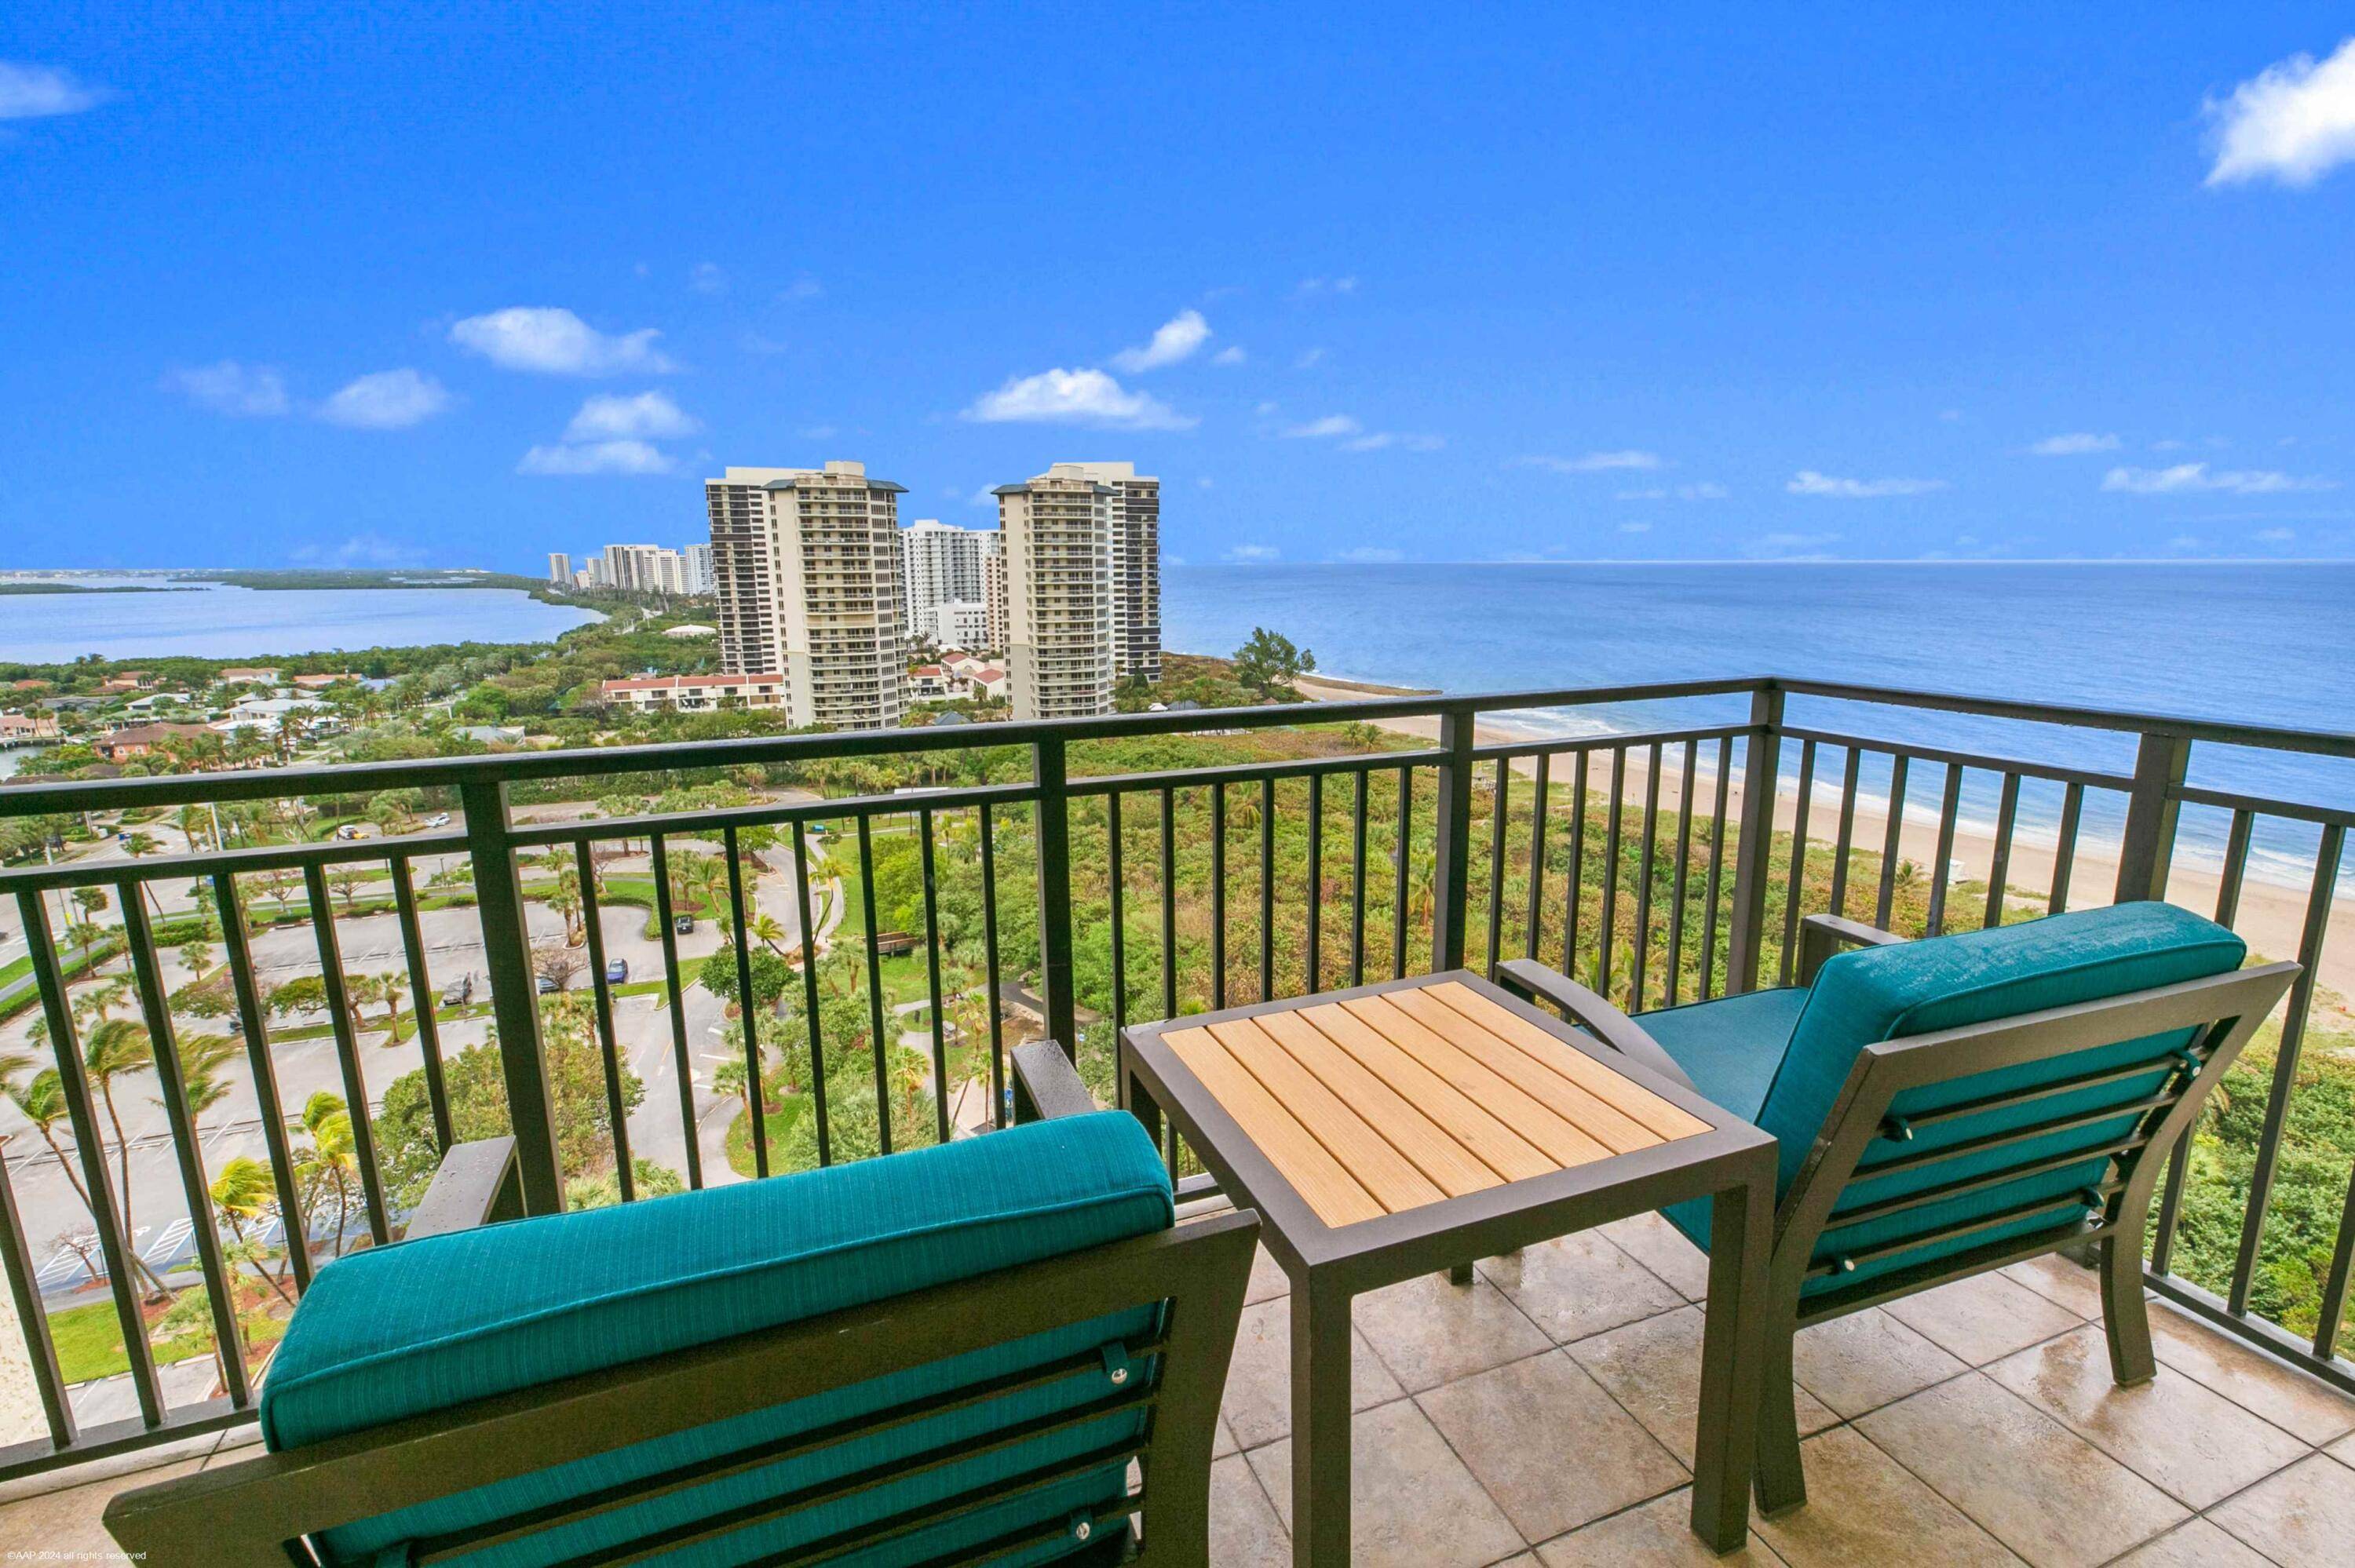 Immerse yourself in the awe inspiring vistas of the ocean, Intracoastal, park from this fully furnished 17th floor 1 bedroom, 1 bath condo with special terrace.